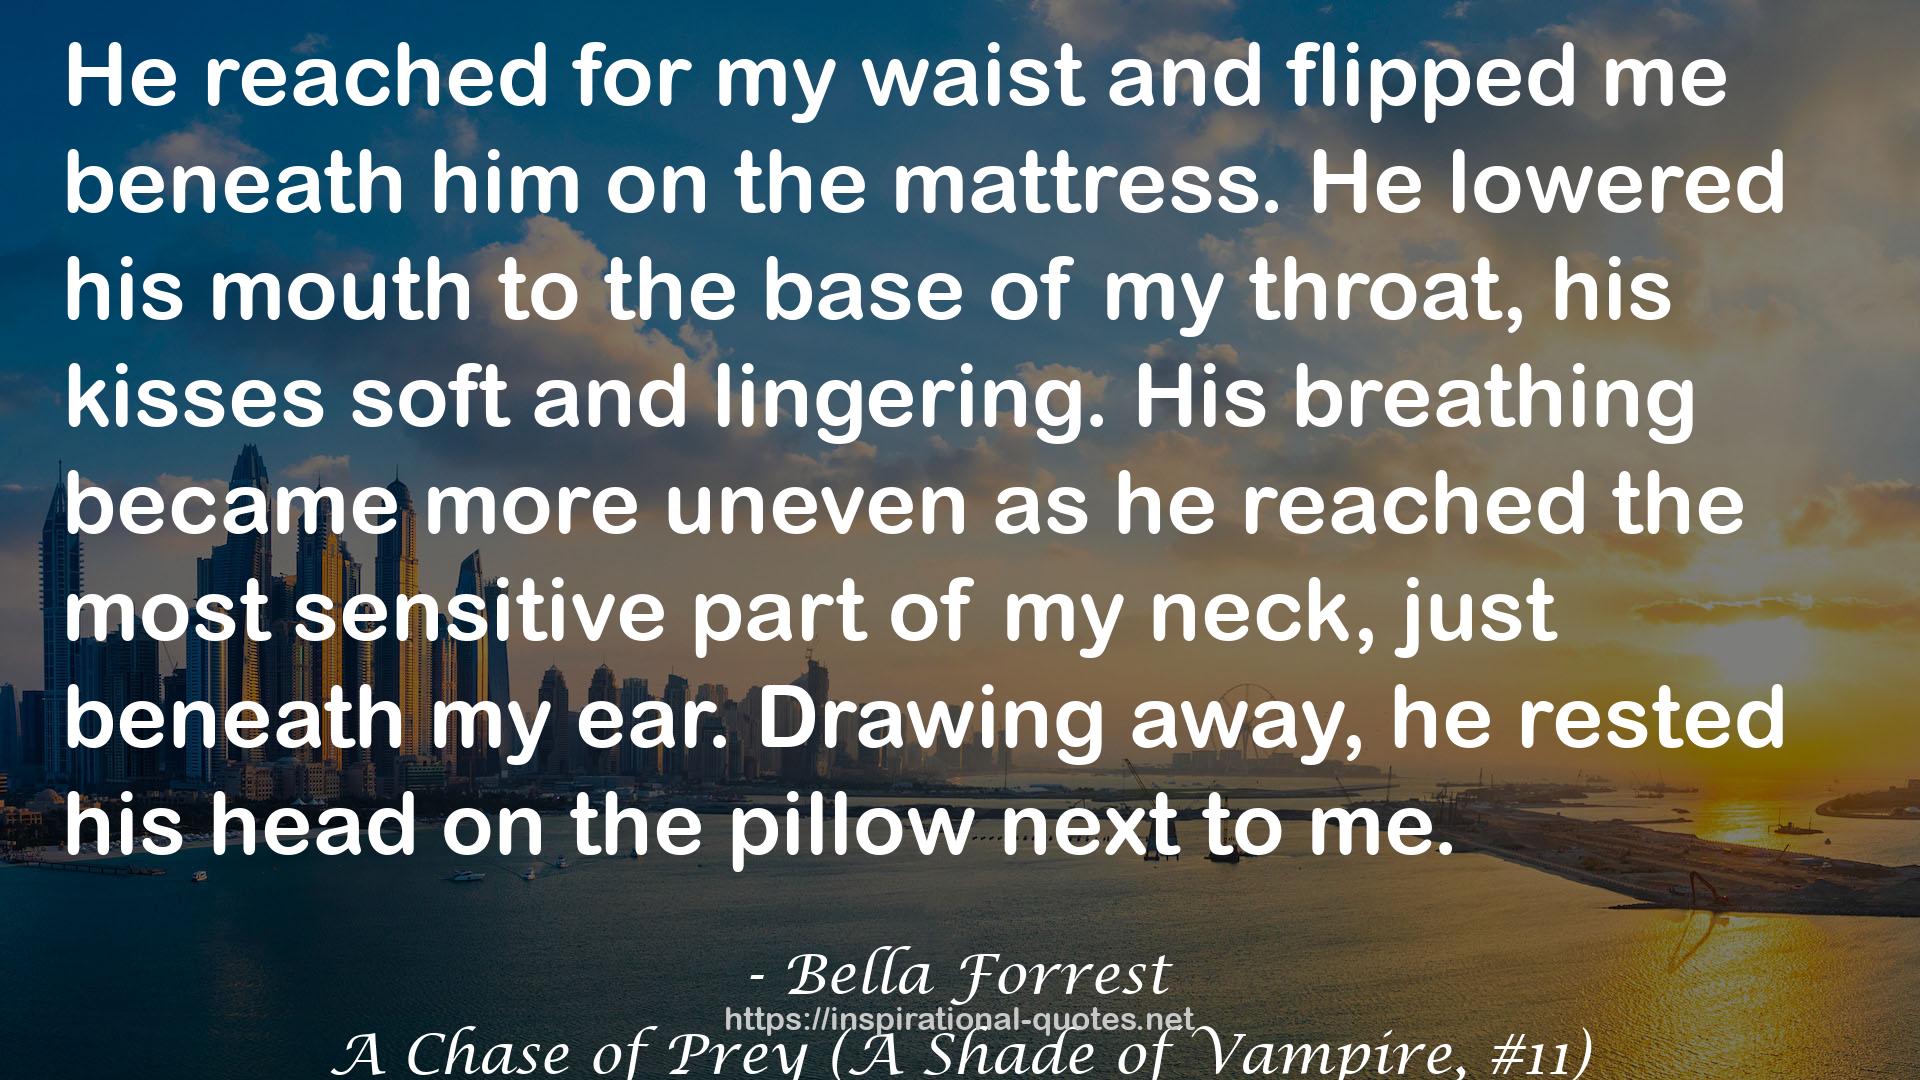 A Chase of Prey (A Shade of Vampire, #11) QUOTES